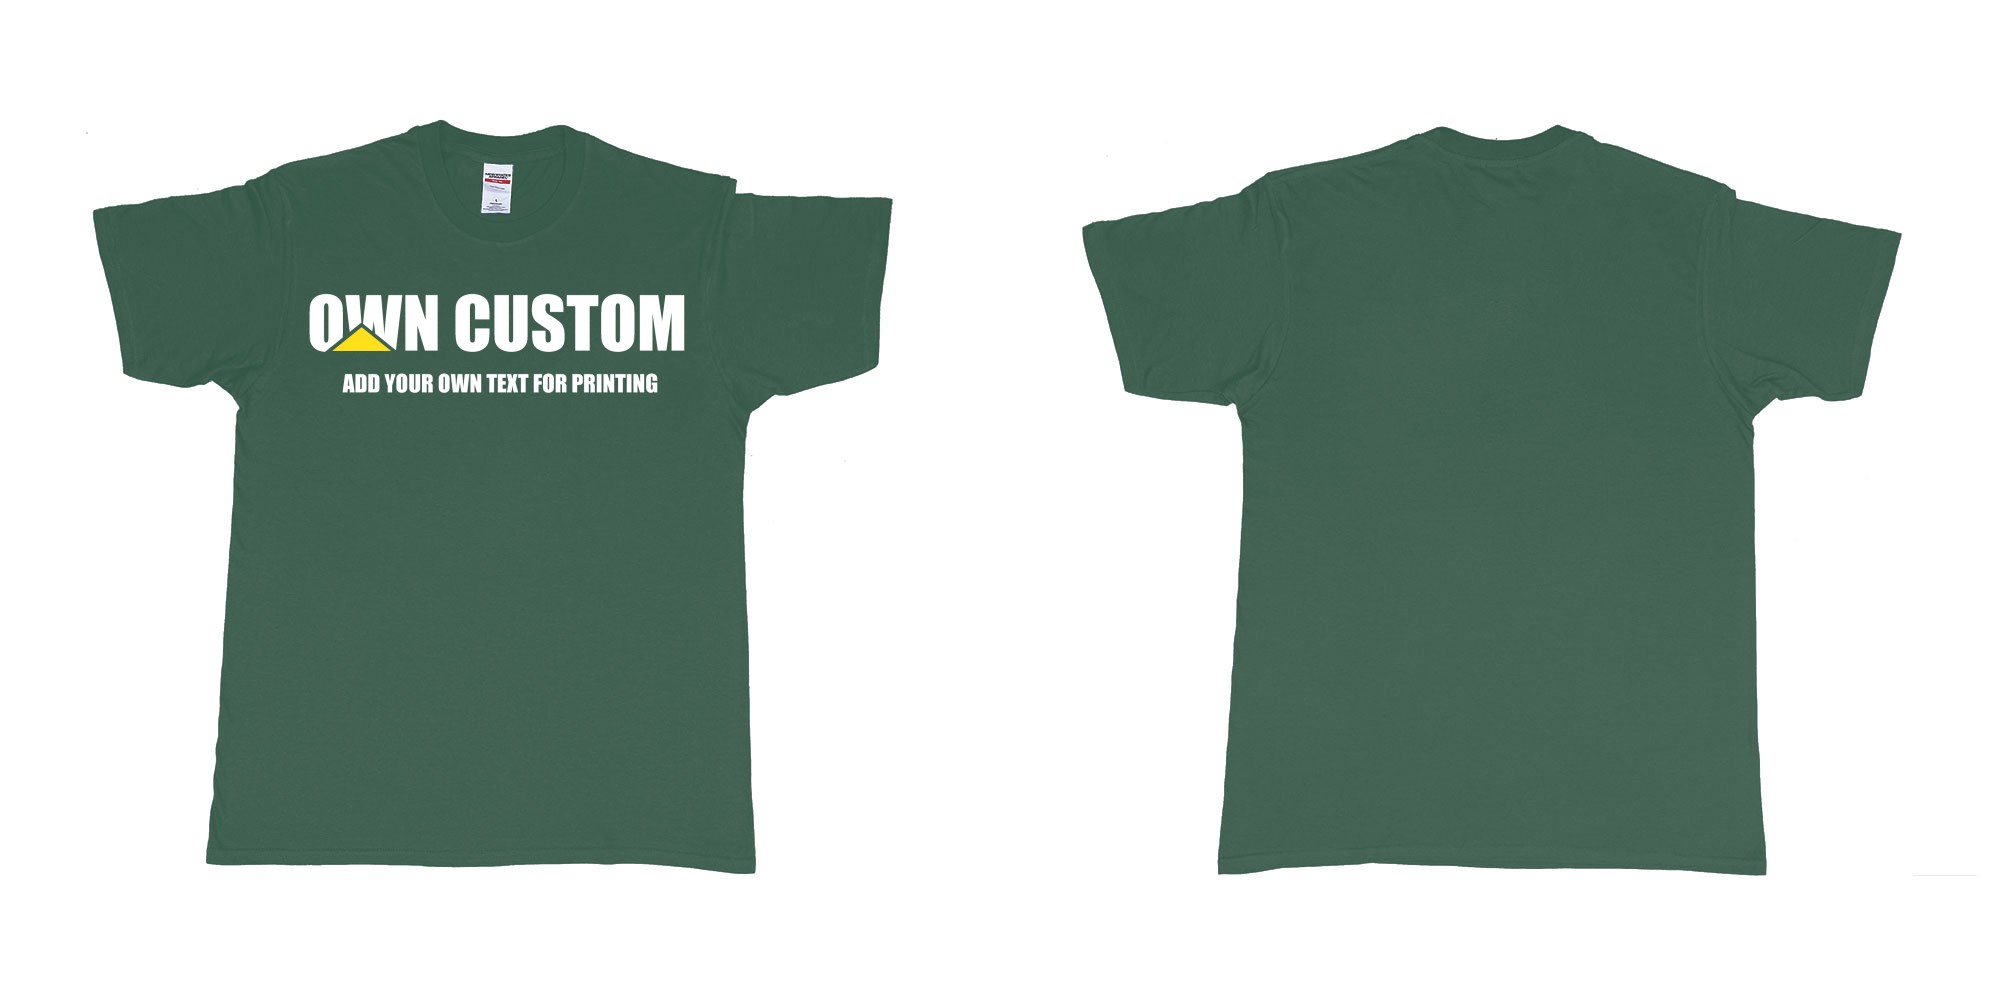 Custom tshirt design caterpillar inc logo custom text printing shirt in fabric color forest-green choice your own text made in Bali by The Pirate Way